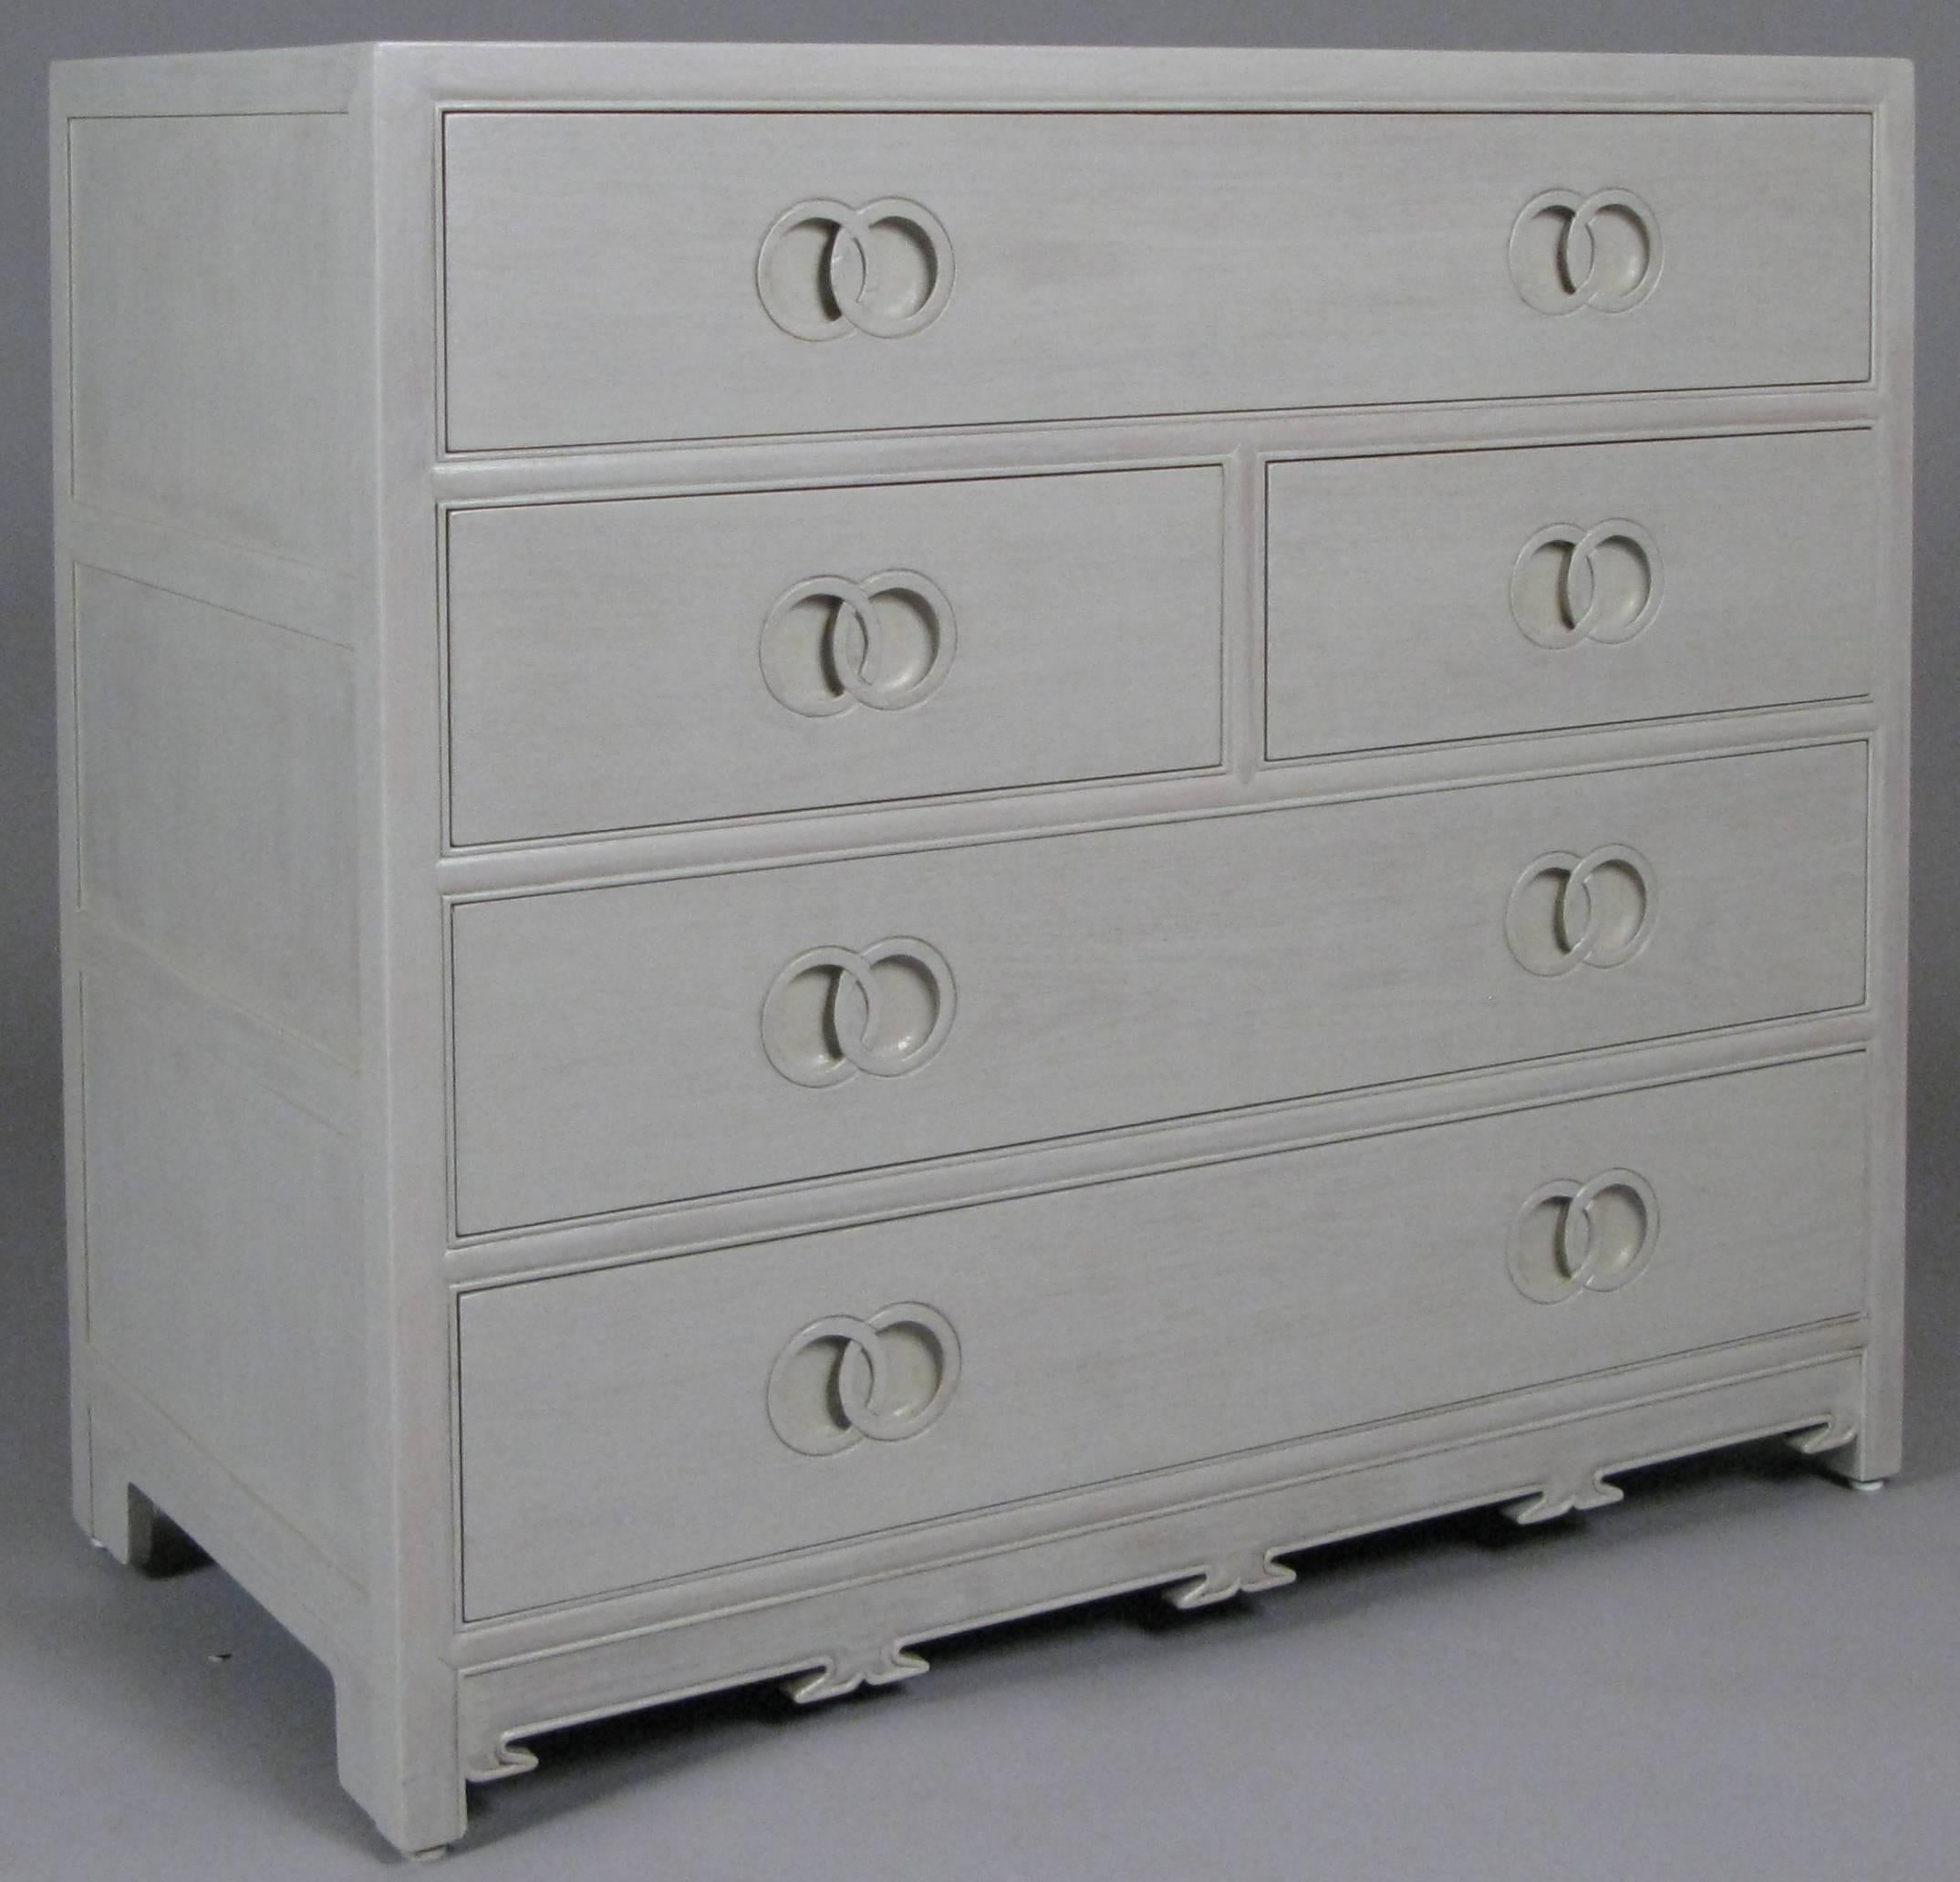 A beautiful and Classic vintage 1950s five-drawer chest designed by Michael Taylor for Baker Furniture with subtle recessed interlocking circle drawer pulls and details along the base as well. Some drawers are divided and the chest has just been